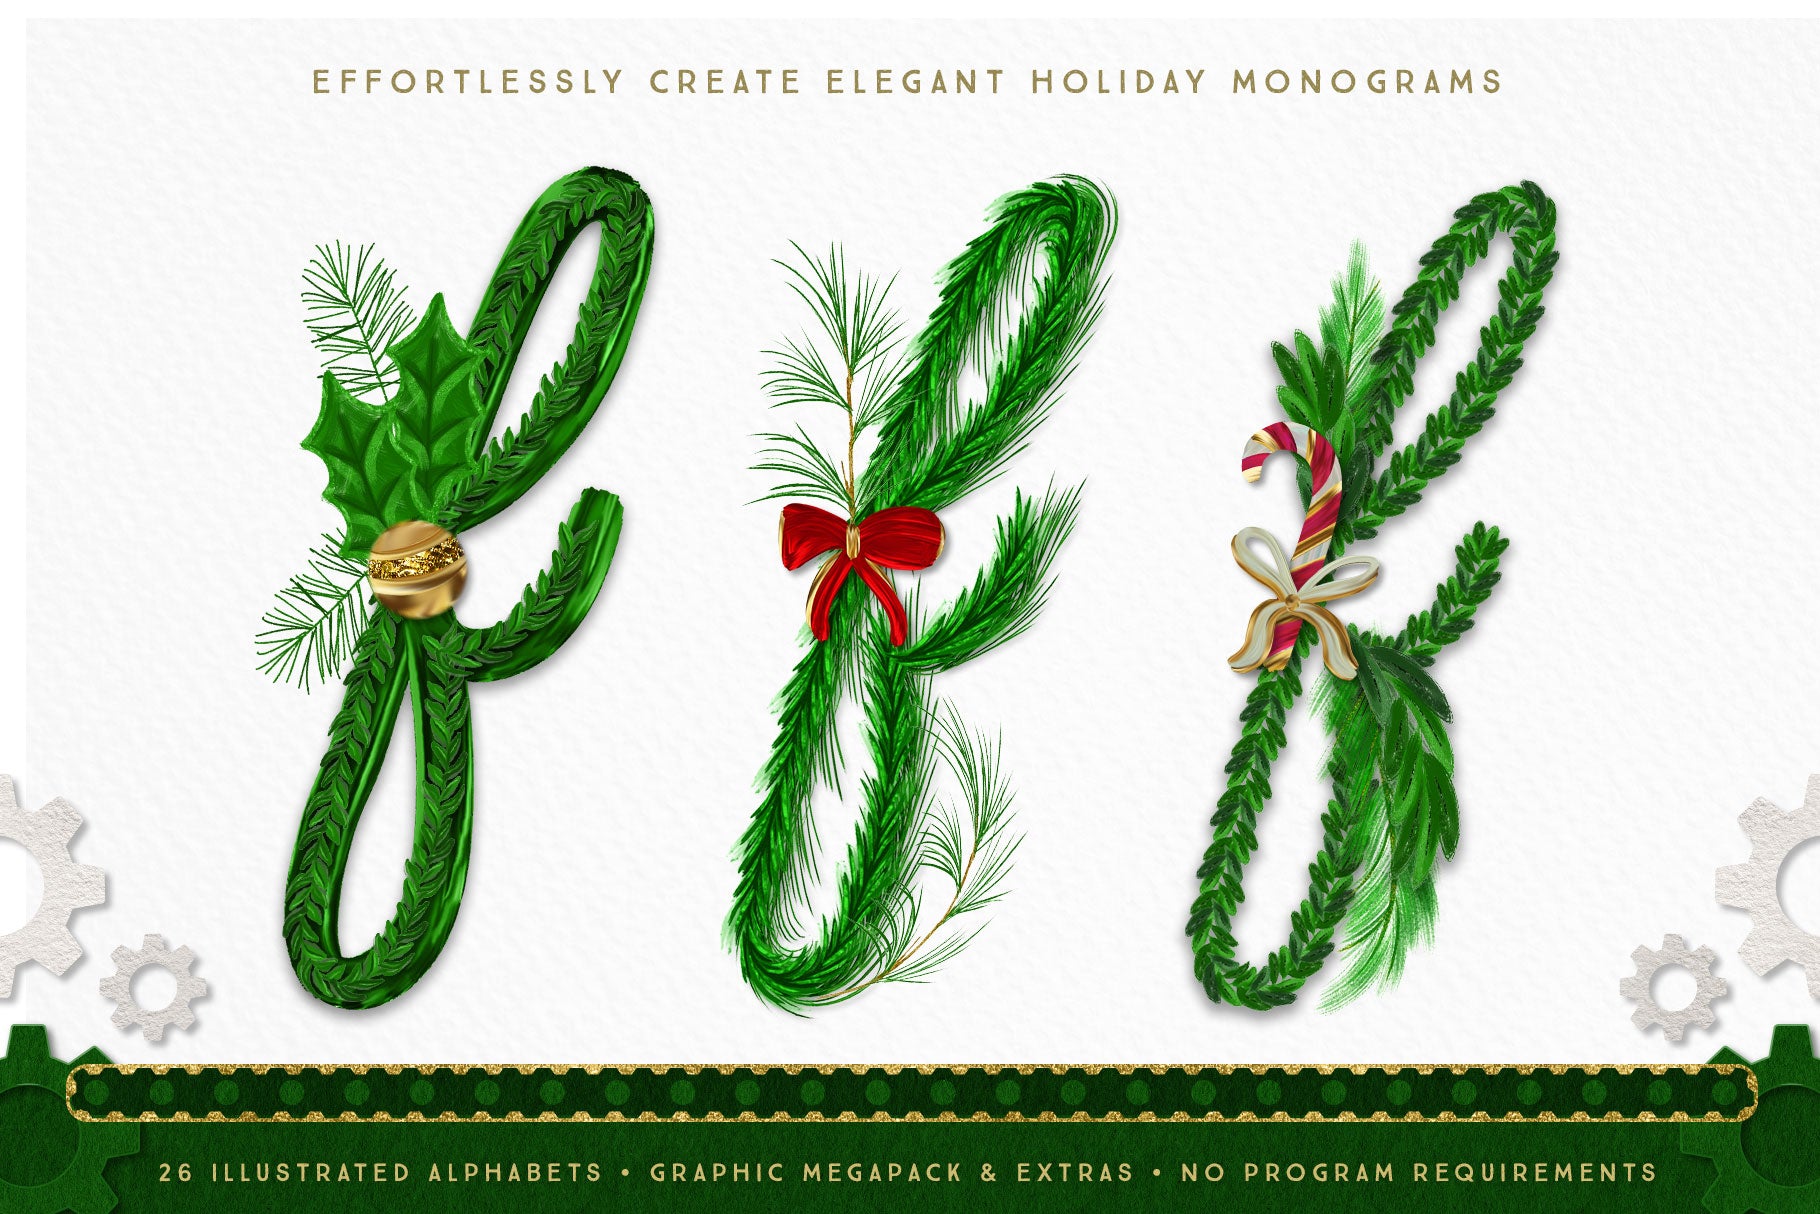 Luxe Christmas & Holiday Greenery Alphabets: holiday monogram design options 